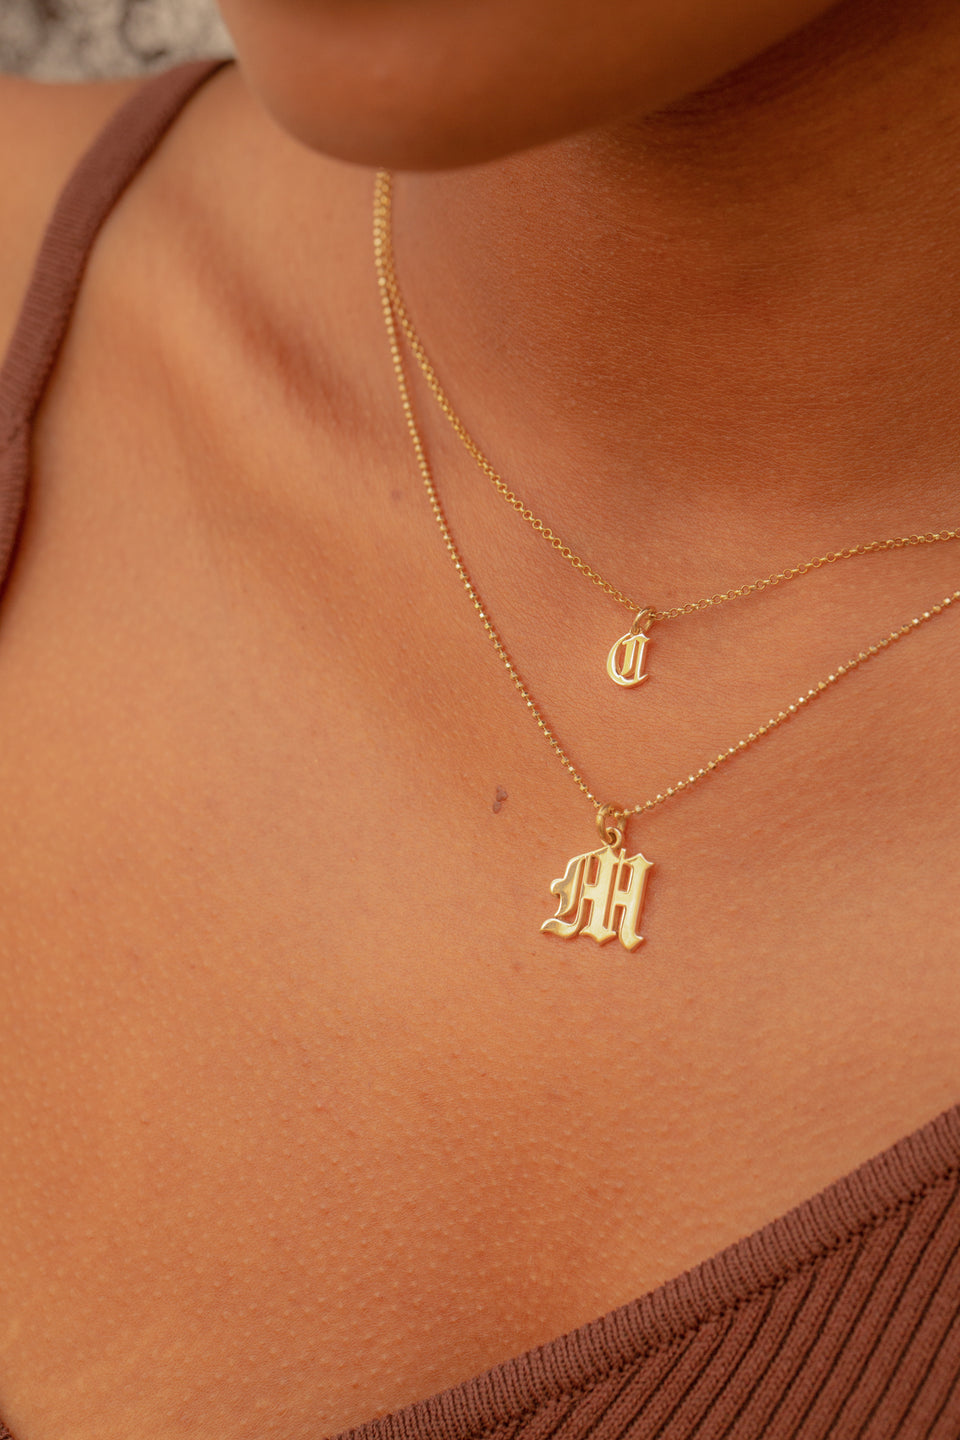 Baby Initial Necklace